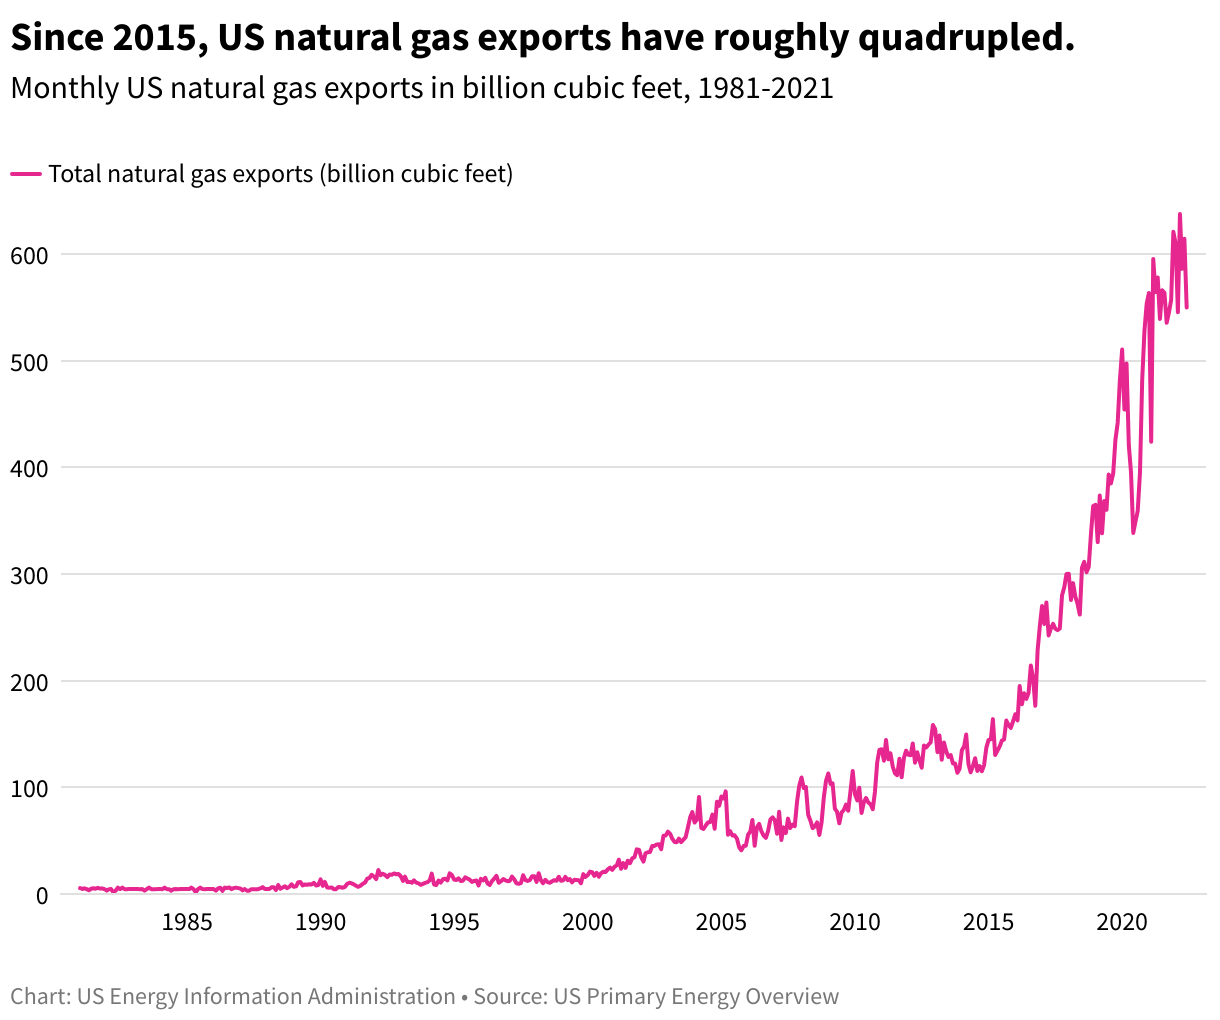 A line graph depicting monthly US natural gas exports in billion cubic feet between 1981 to 2021.